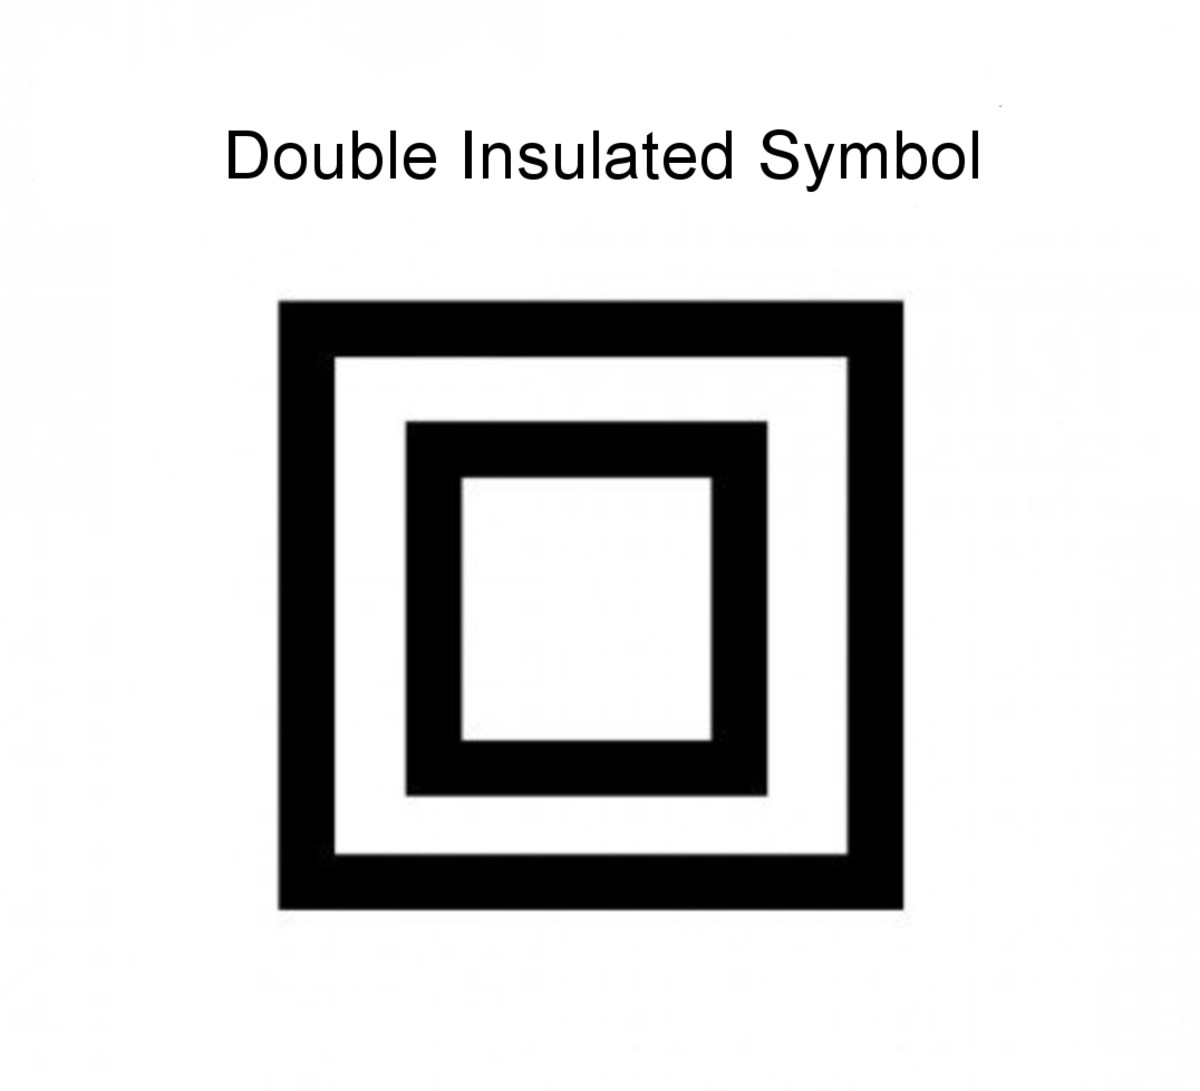 Double insulated appliances are marked with this symbol.